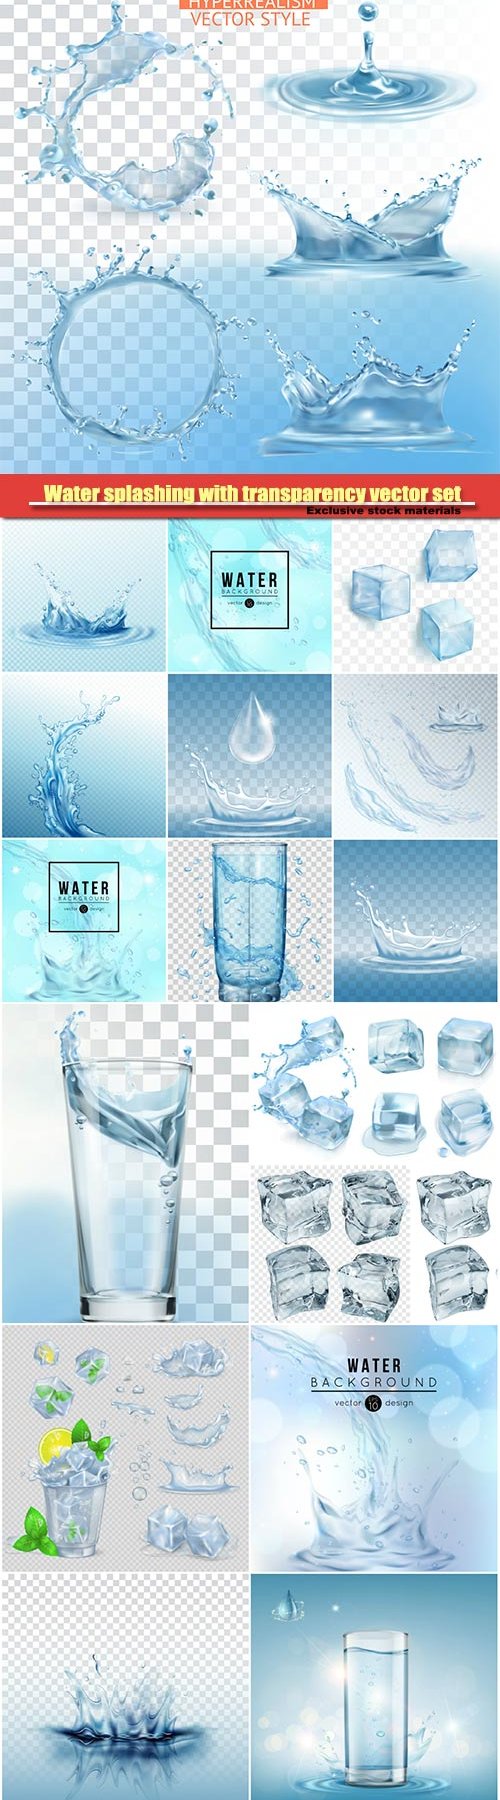 Water splashing with transparency vector set, glass with water, green mint leaves and ice cubes 